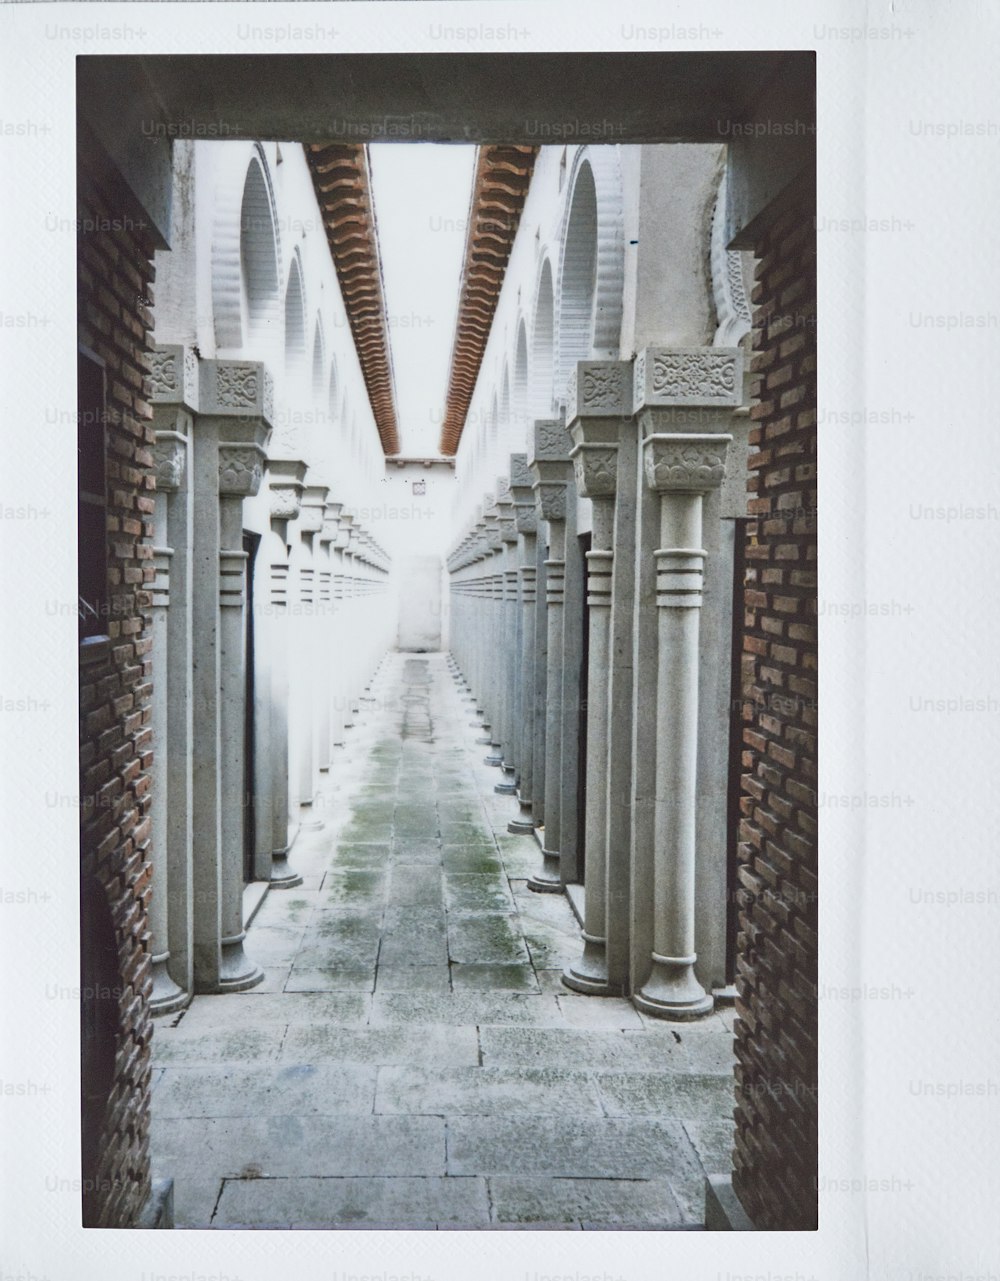 a picture of a walkway with columns and arches